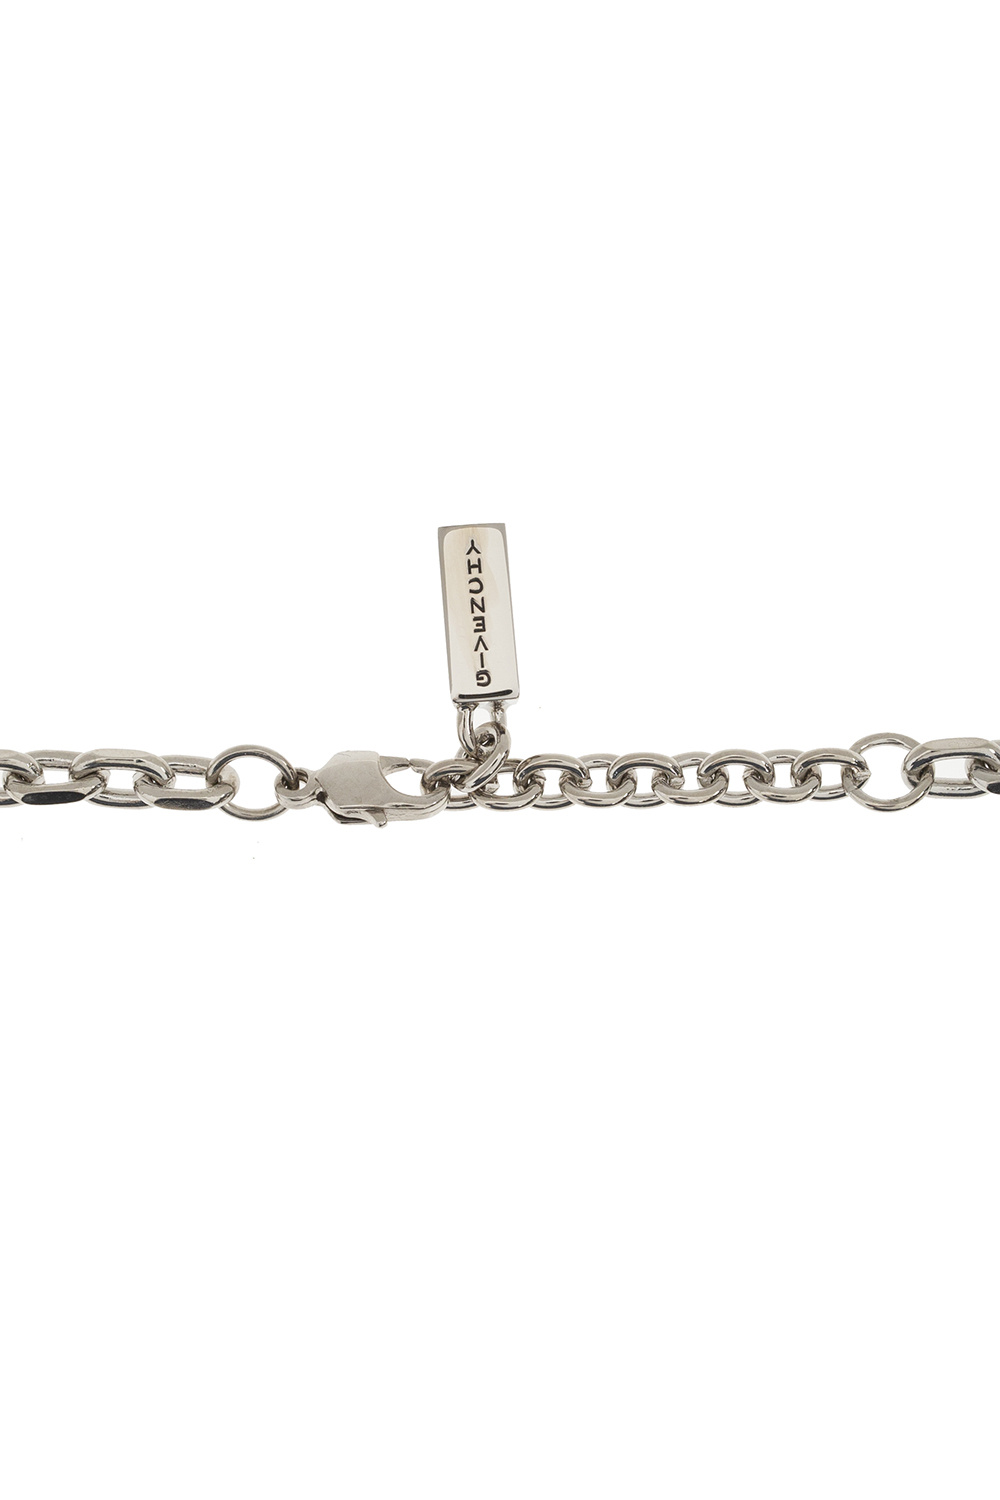 John Varvatos PADLOCK Men's Chain Necklace in Silver and Brass